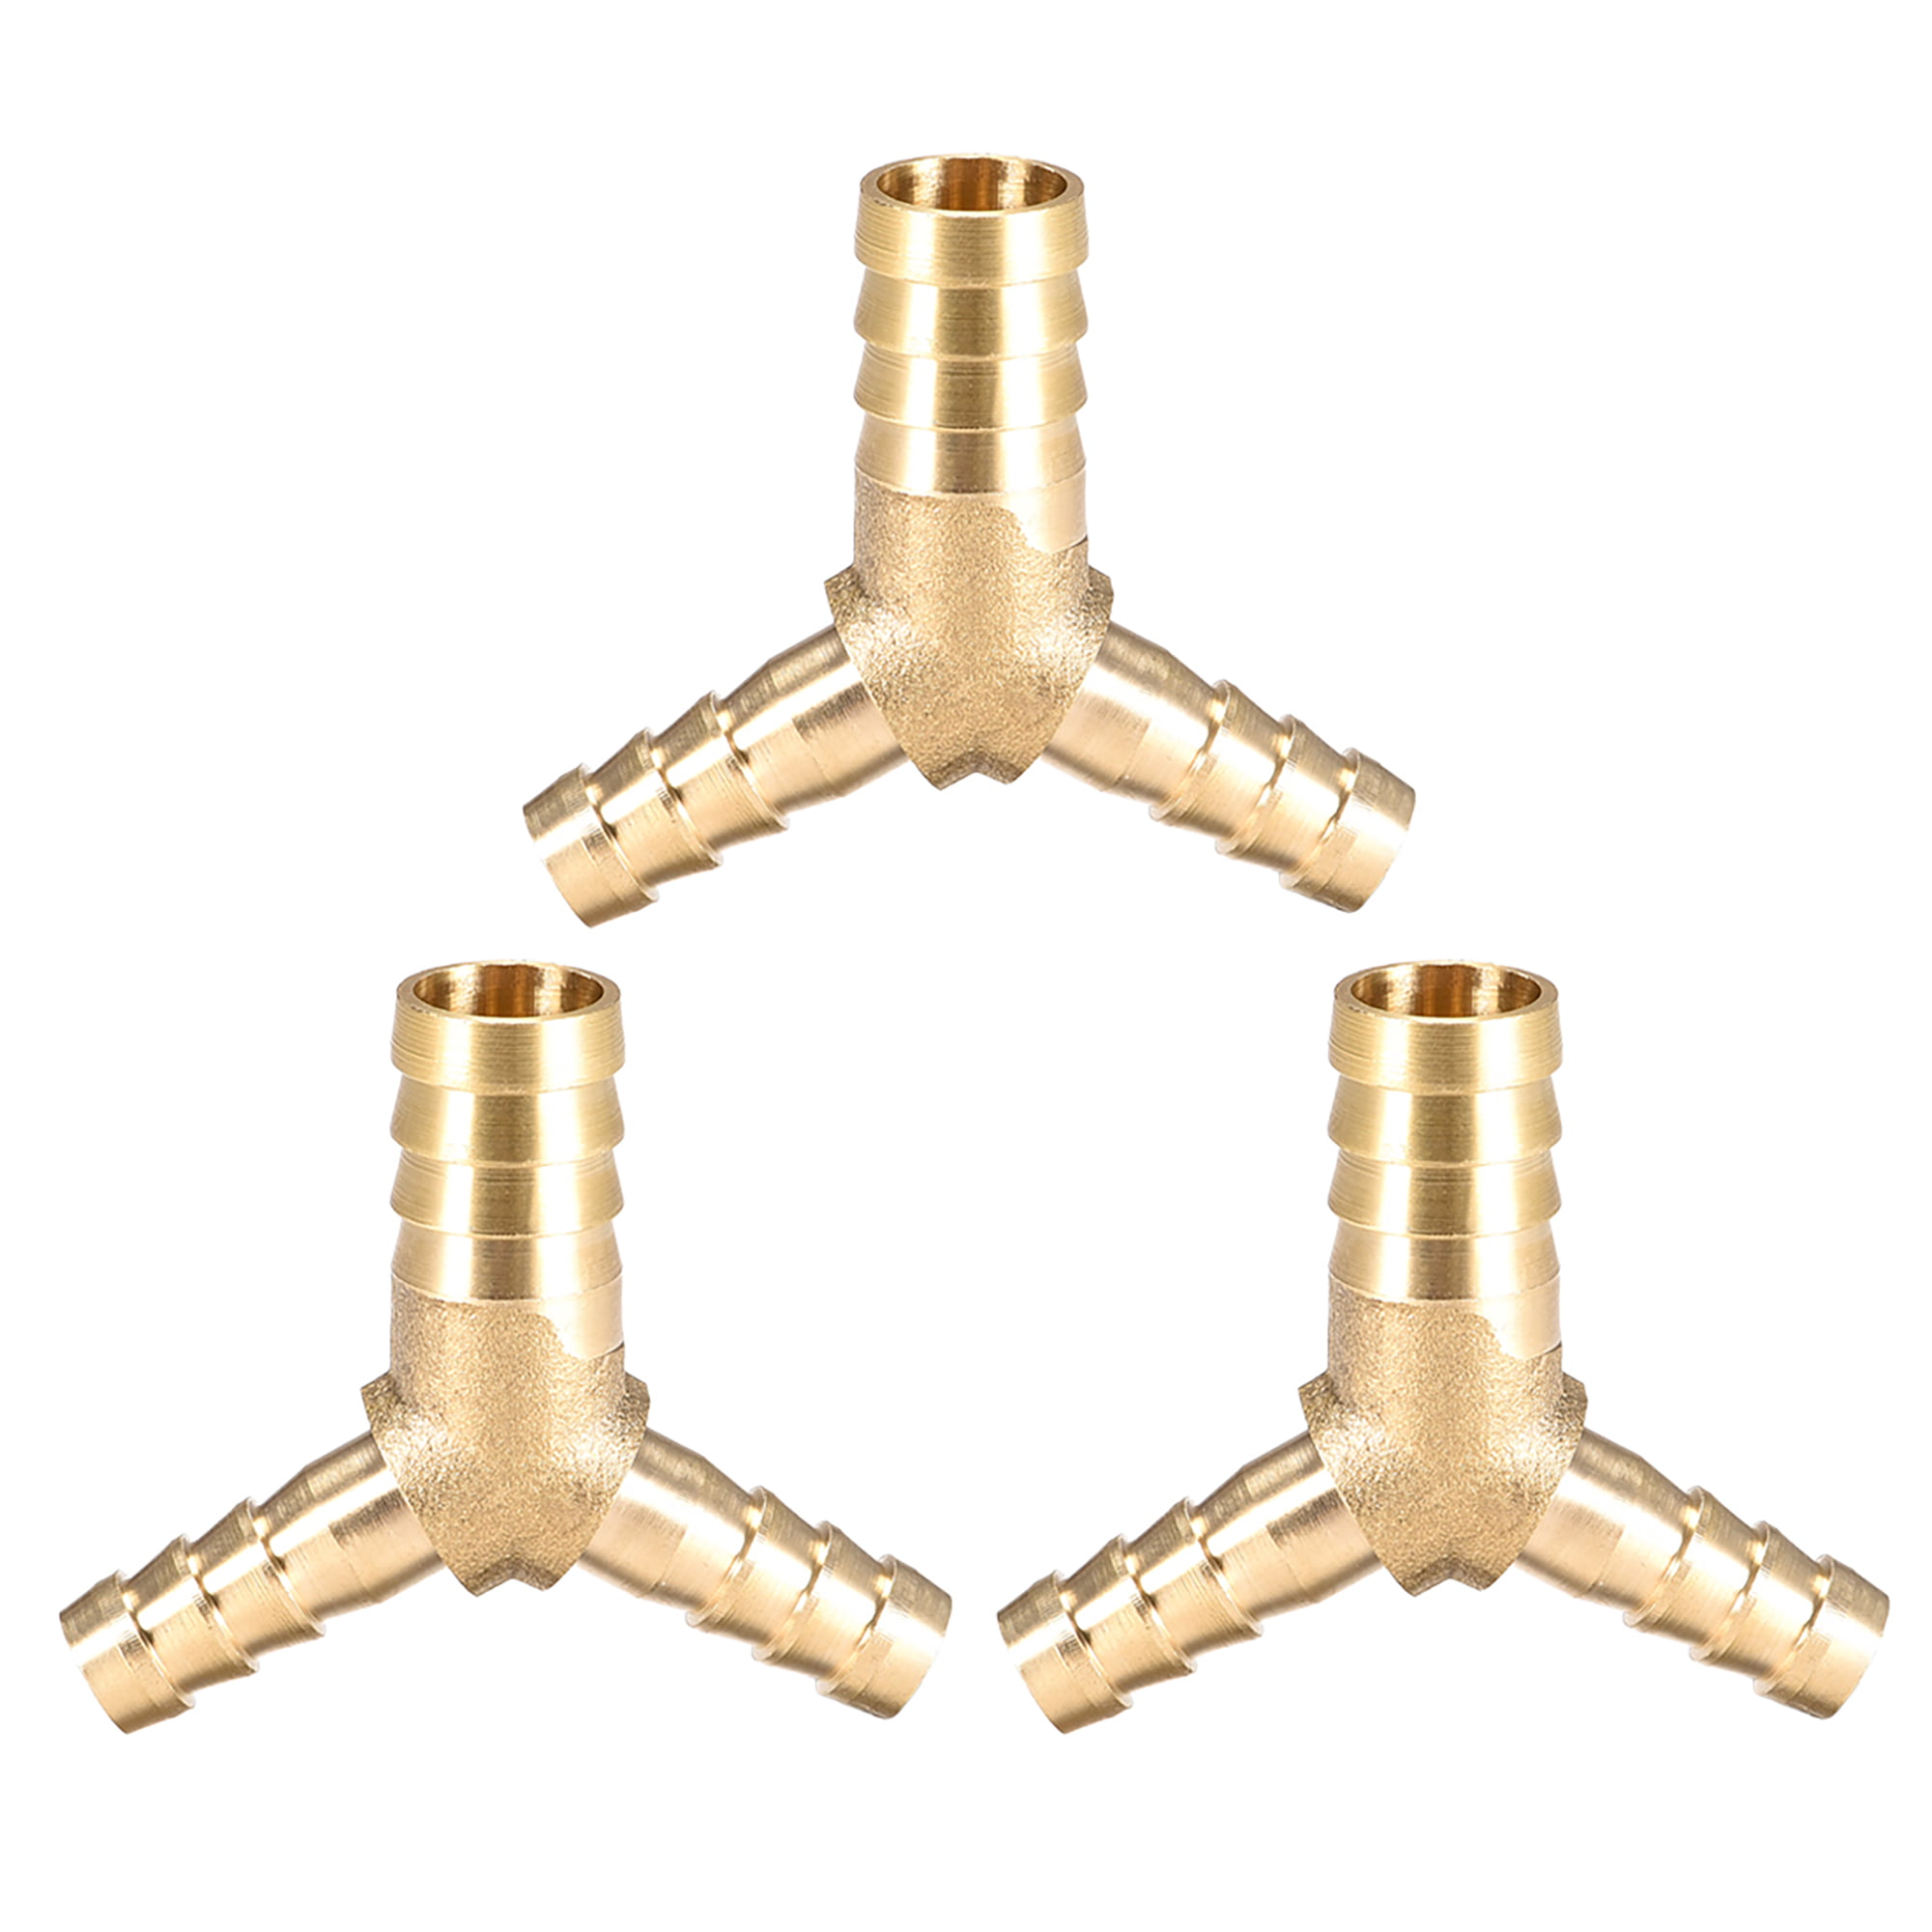 5 Pcs Y Shape 3 Way 8mm Hose Barb Fitting Coupler Connector Gold Tone 